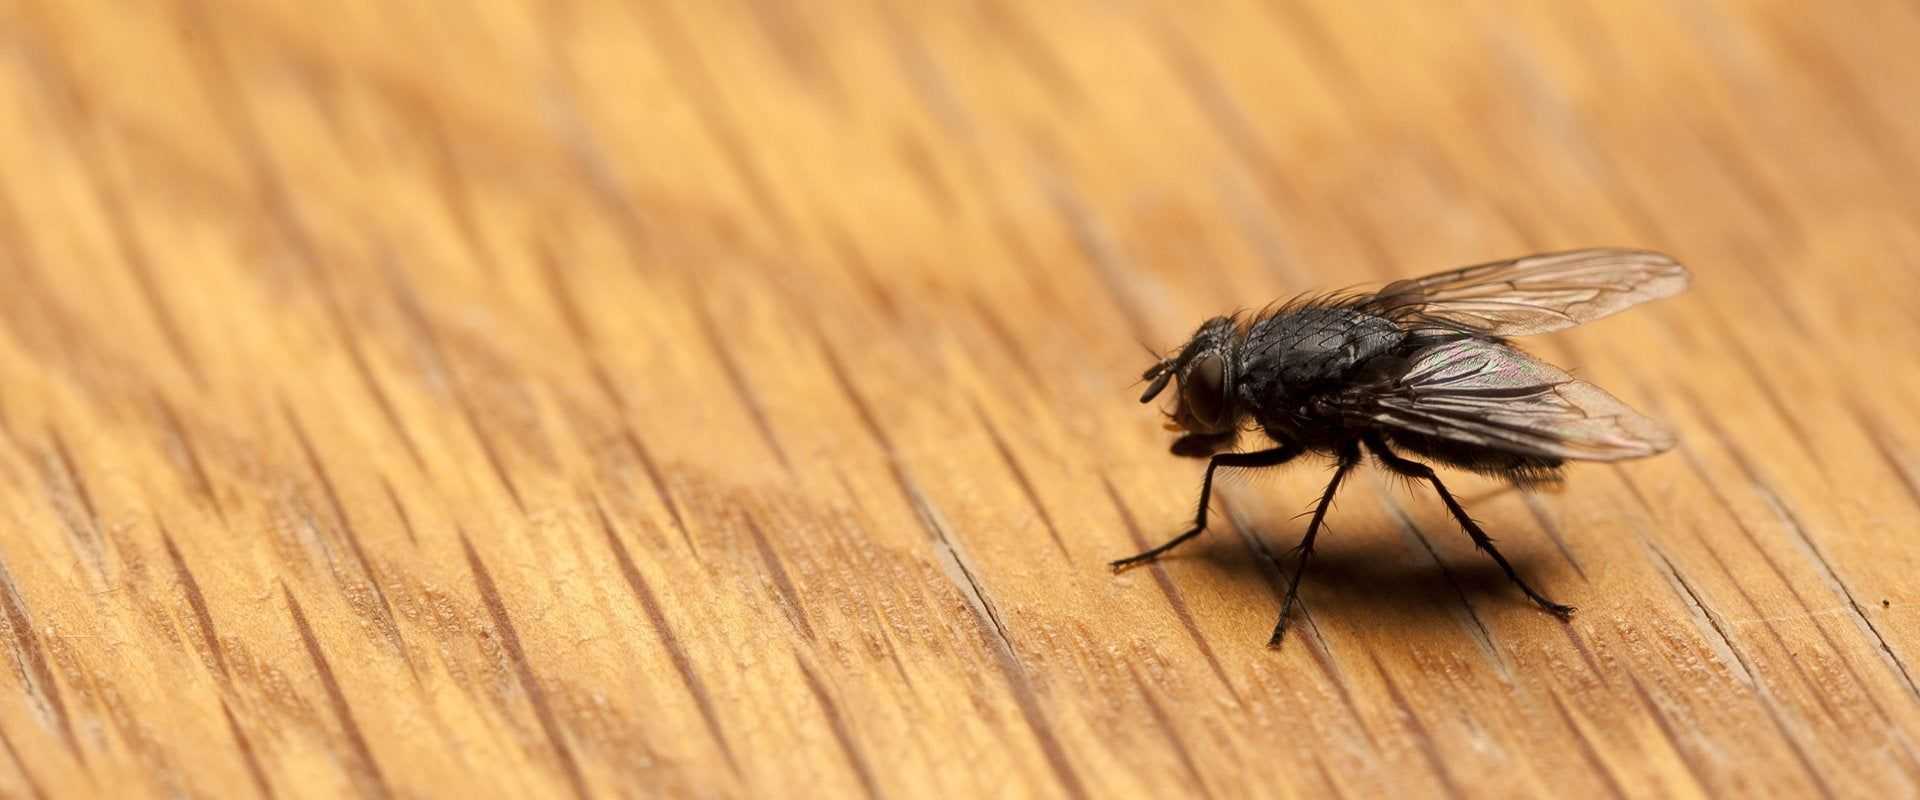 a house fly on a wooden table